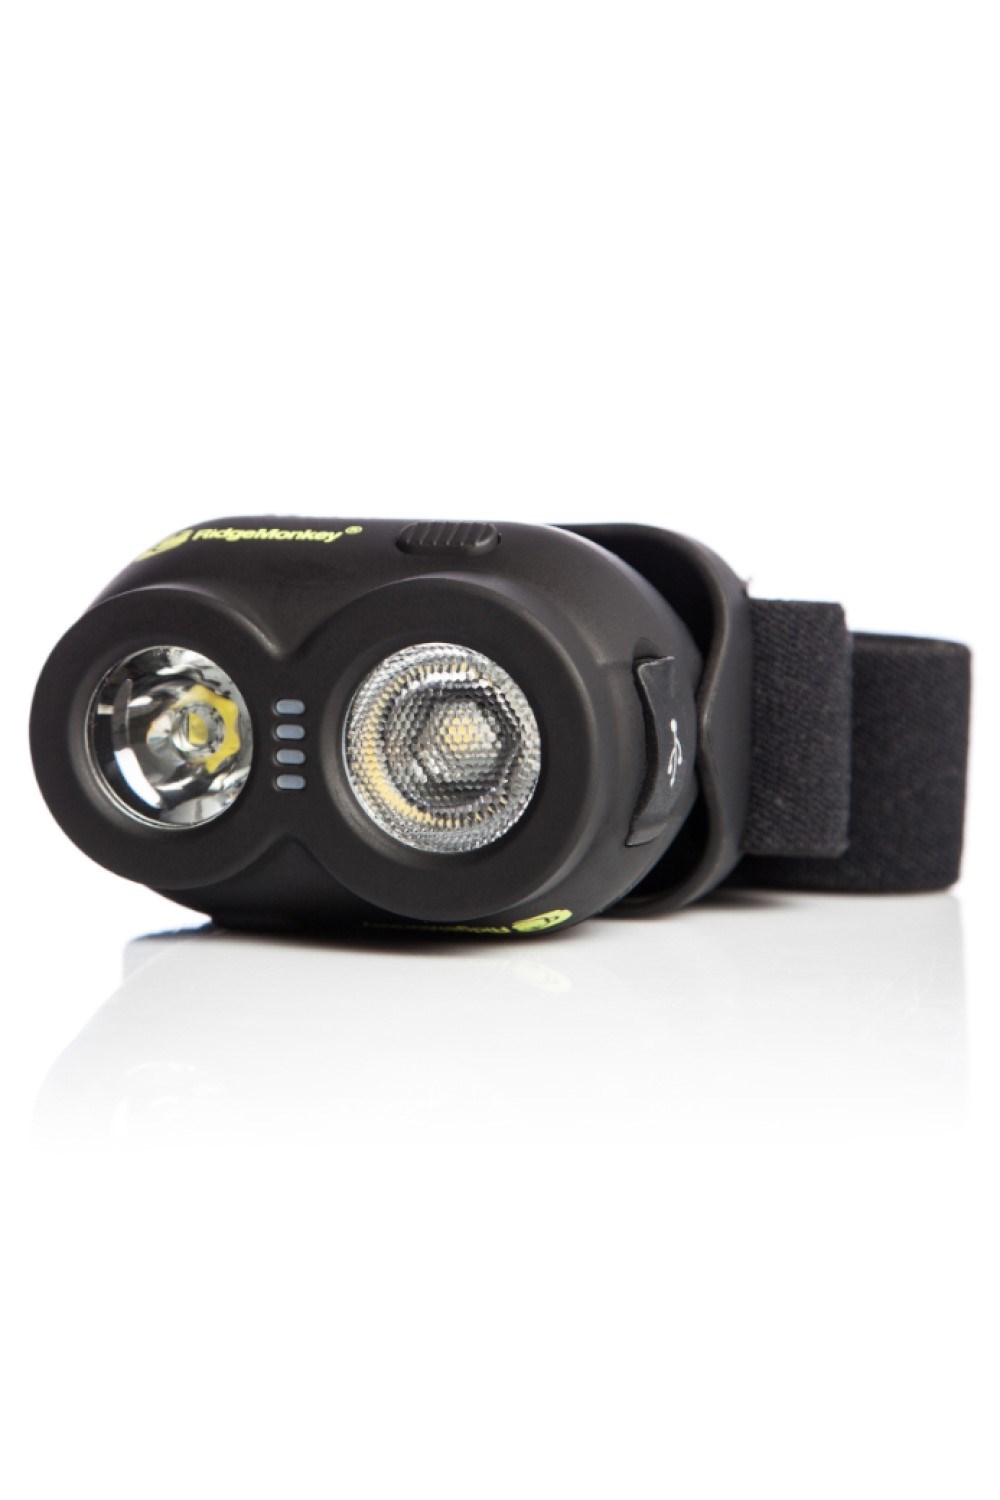 Vrh150x Usb Rechargeable Headtorch -